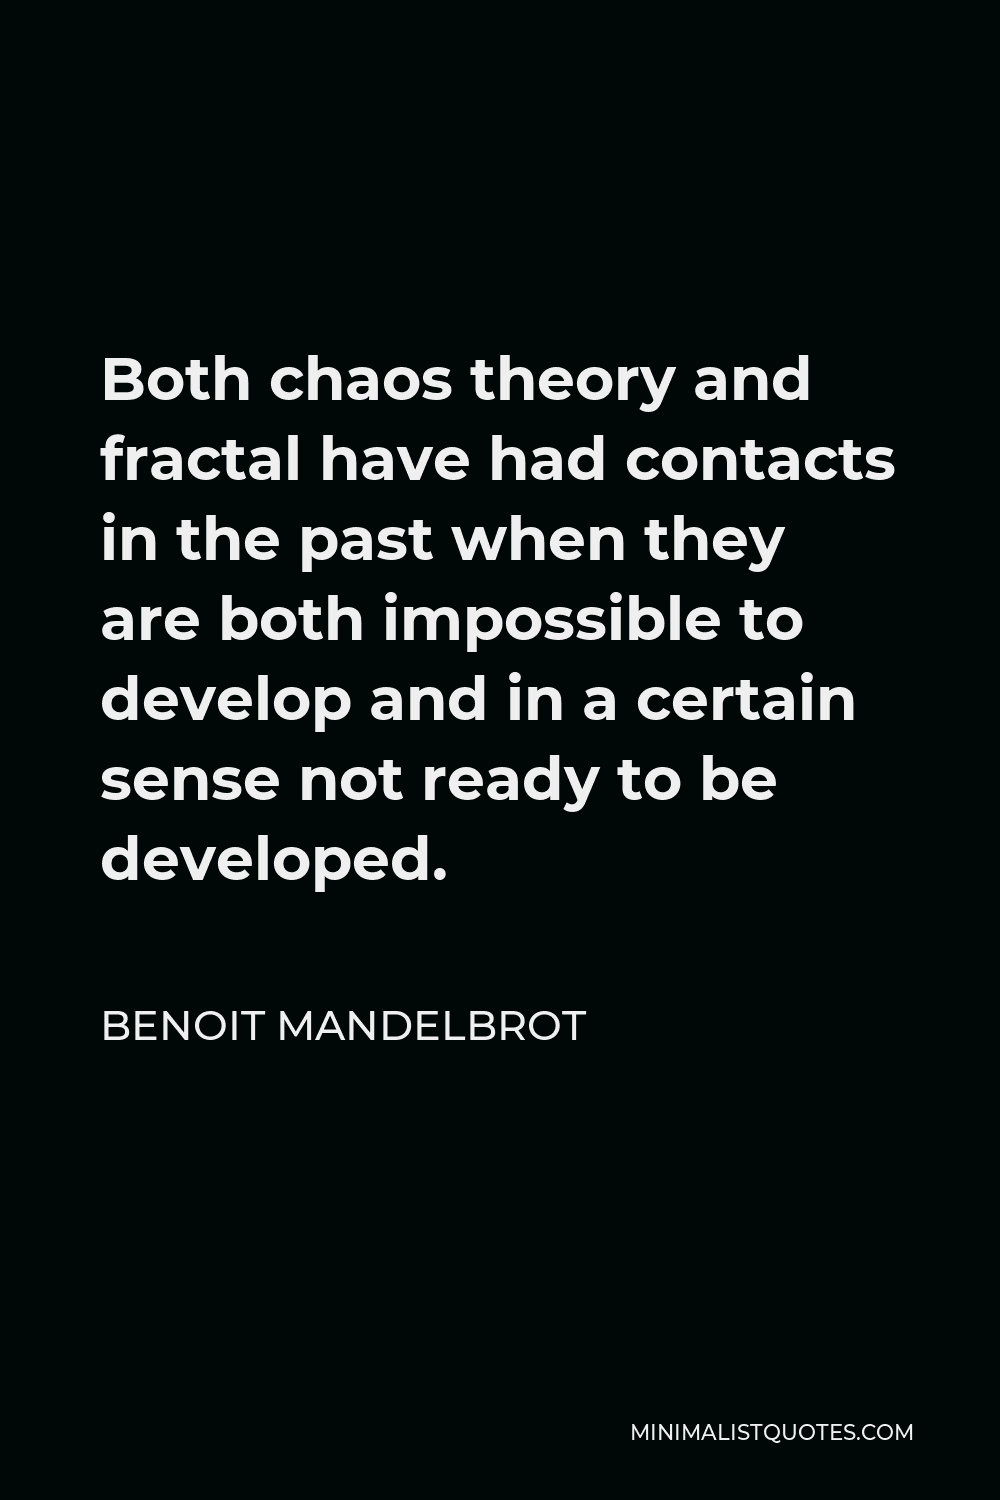 Benoit Mandelbrot Quote - Both chaos theory and fractal have had contacts in the past when they are both impossible to develop and in a certain sense not ready to be developed.